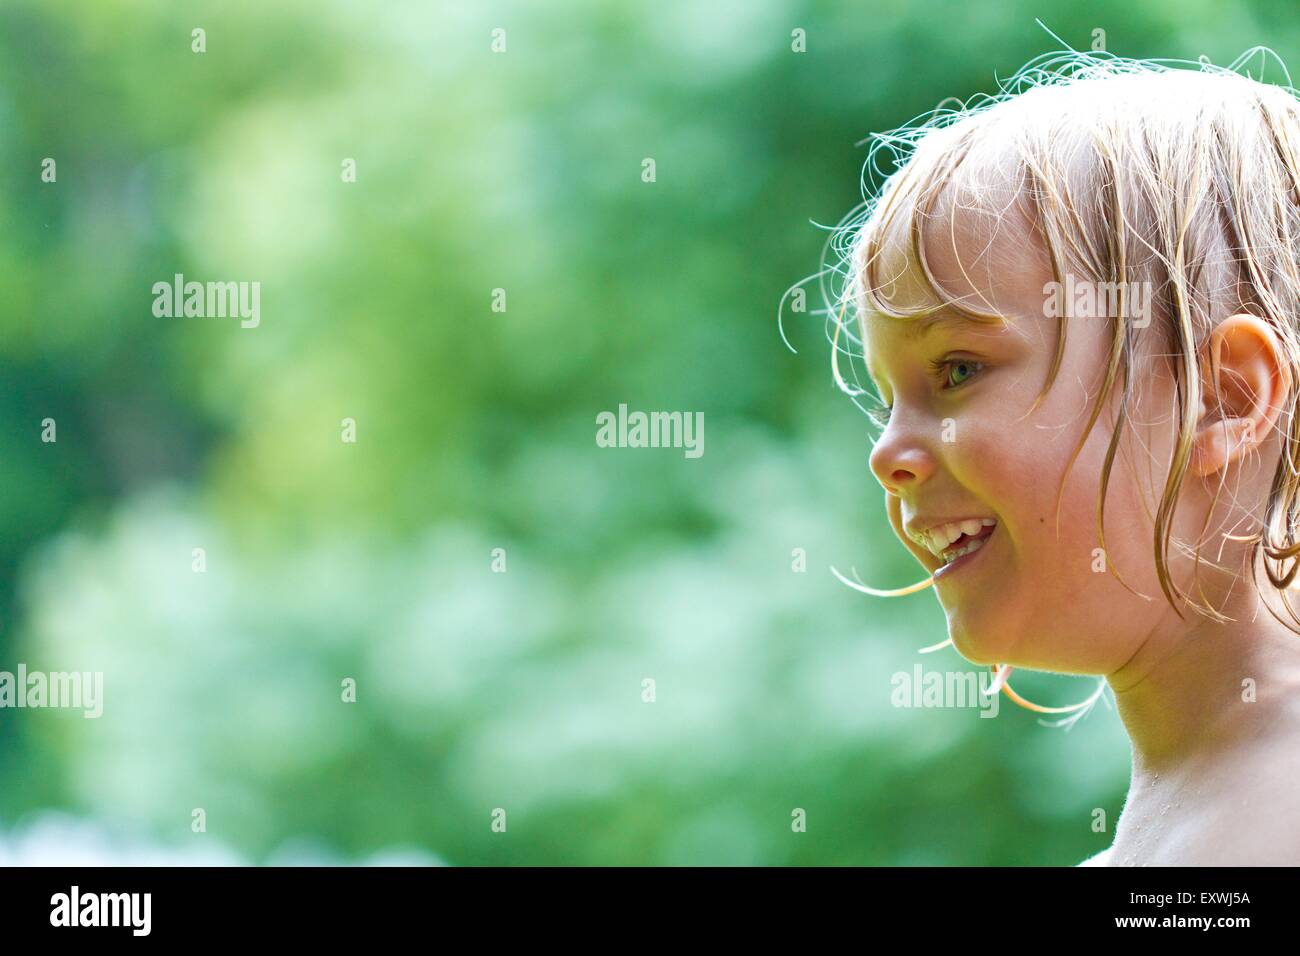 Girl with wet hair Stock Photo